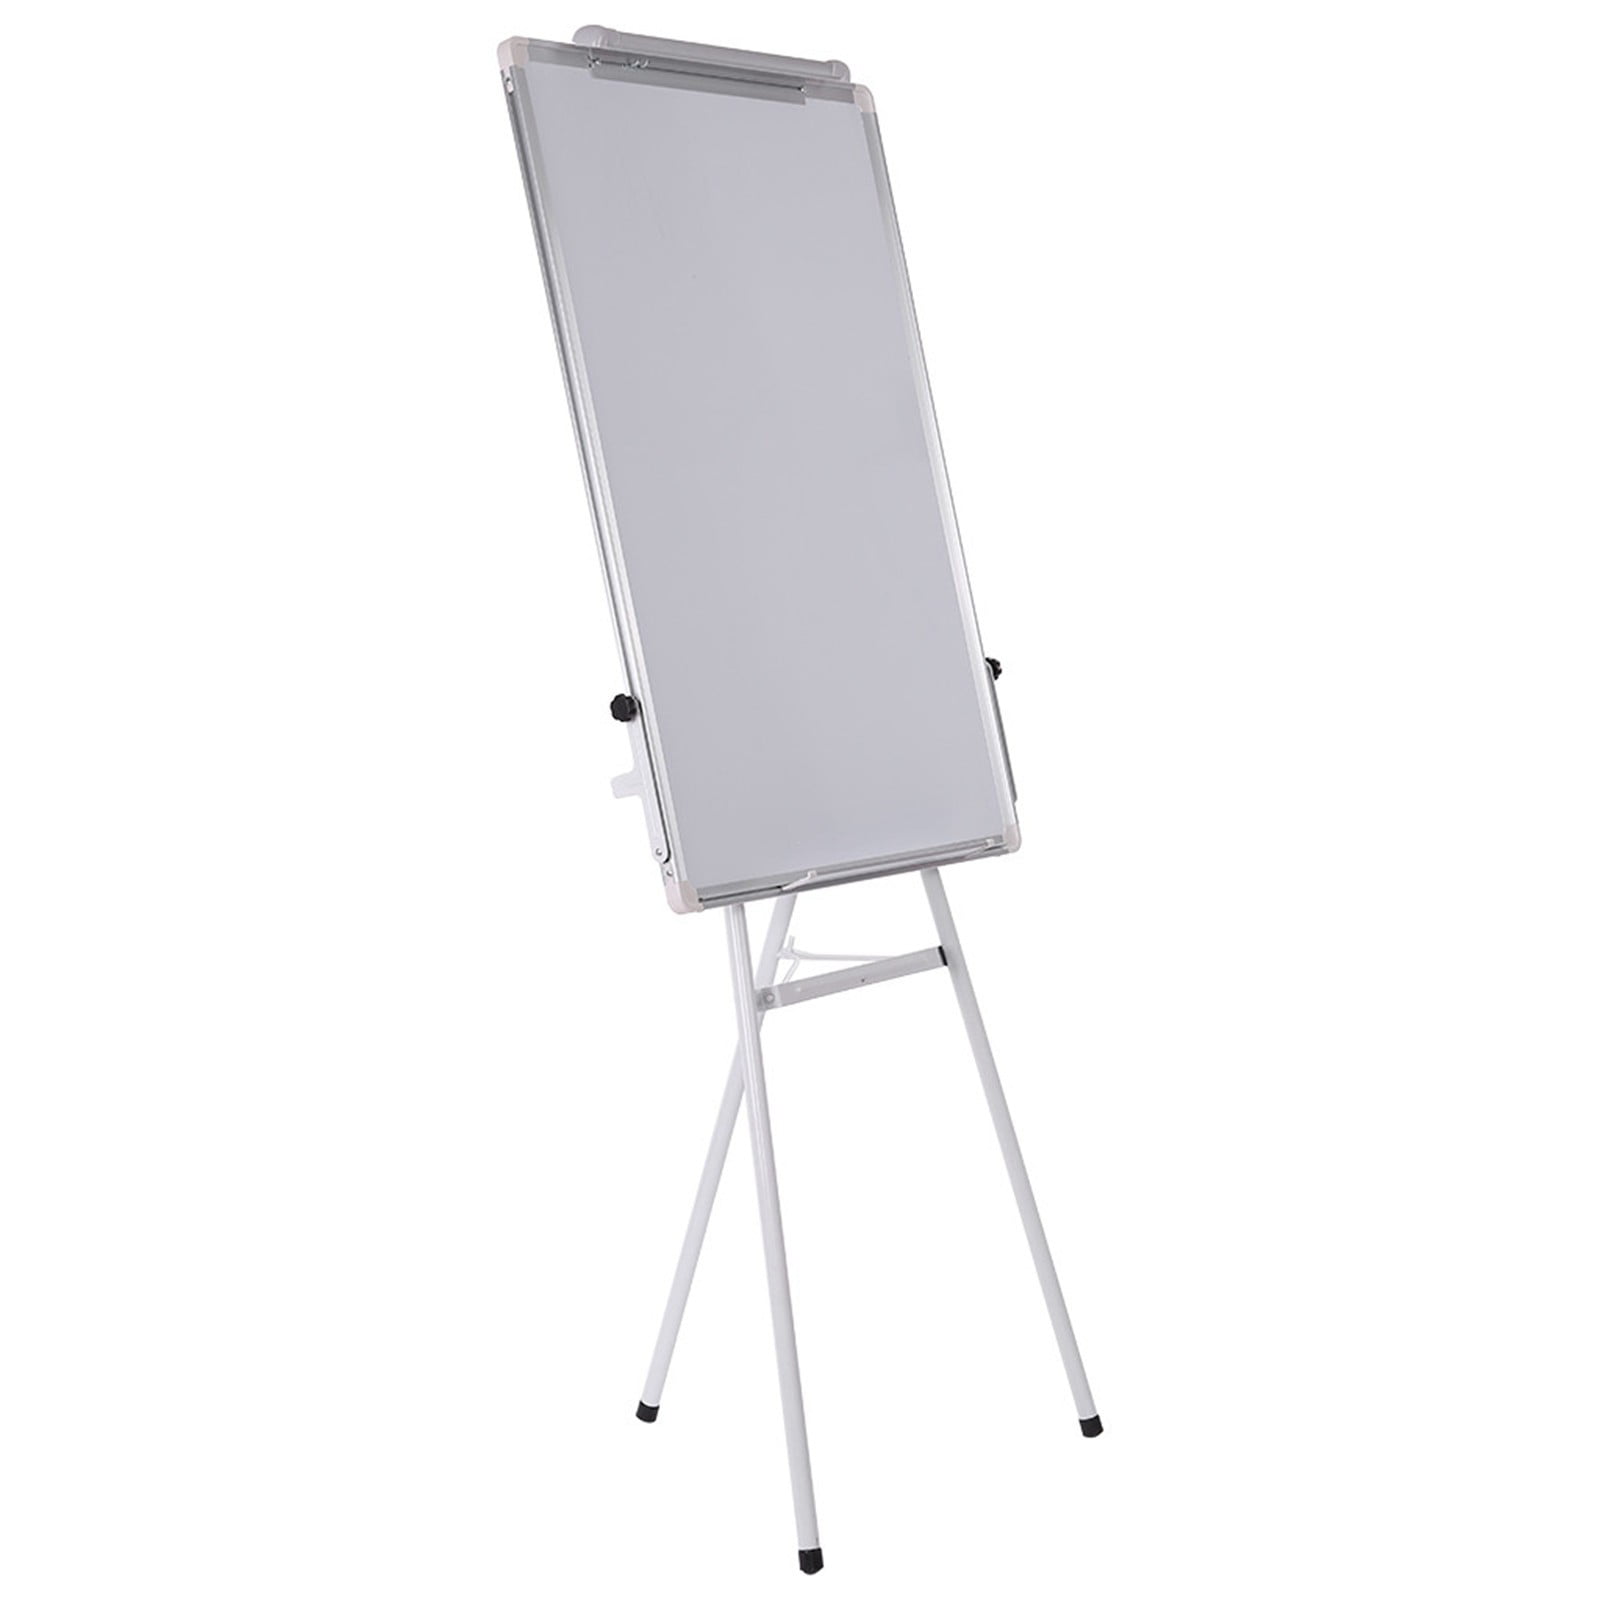 Details about   Magnetic Portable Erase Easel Board 36x24 Tripod Whiteboard Height Adjustable US 